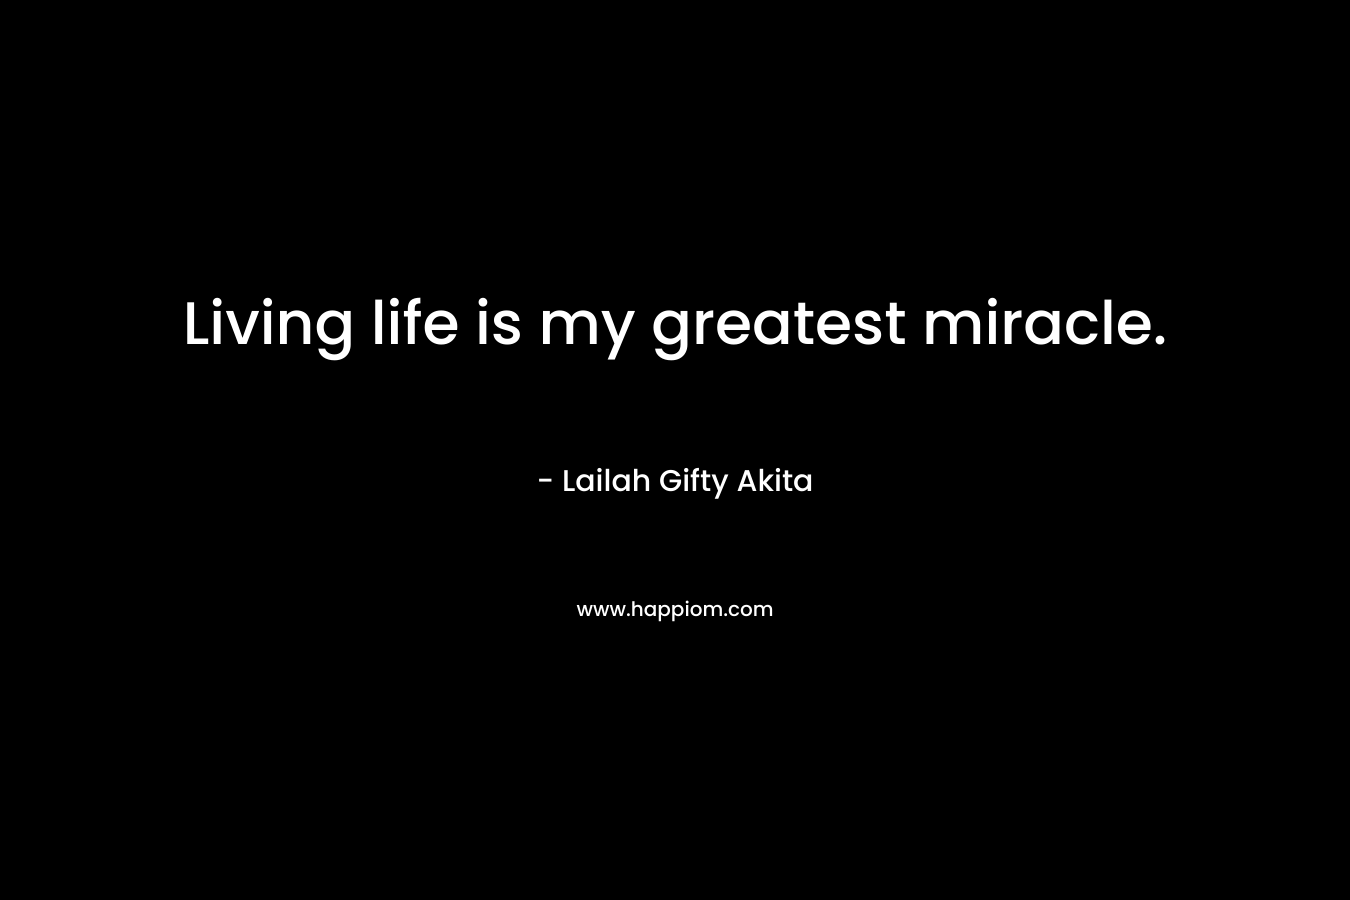 Living life is my greatest miracle.